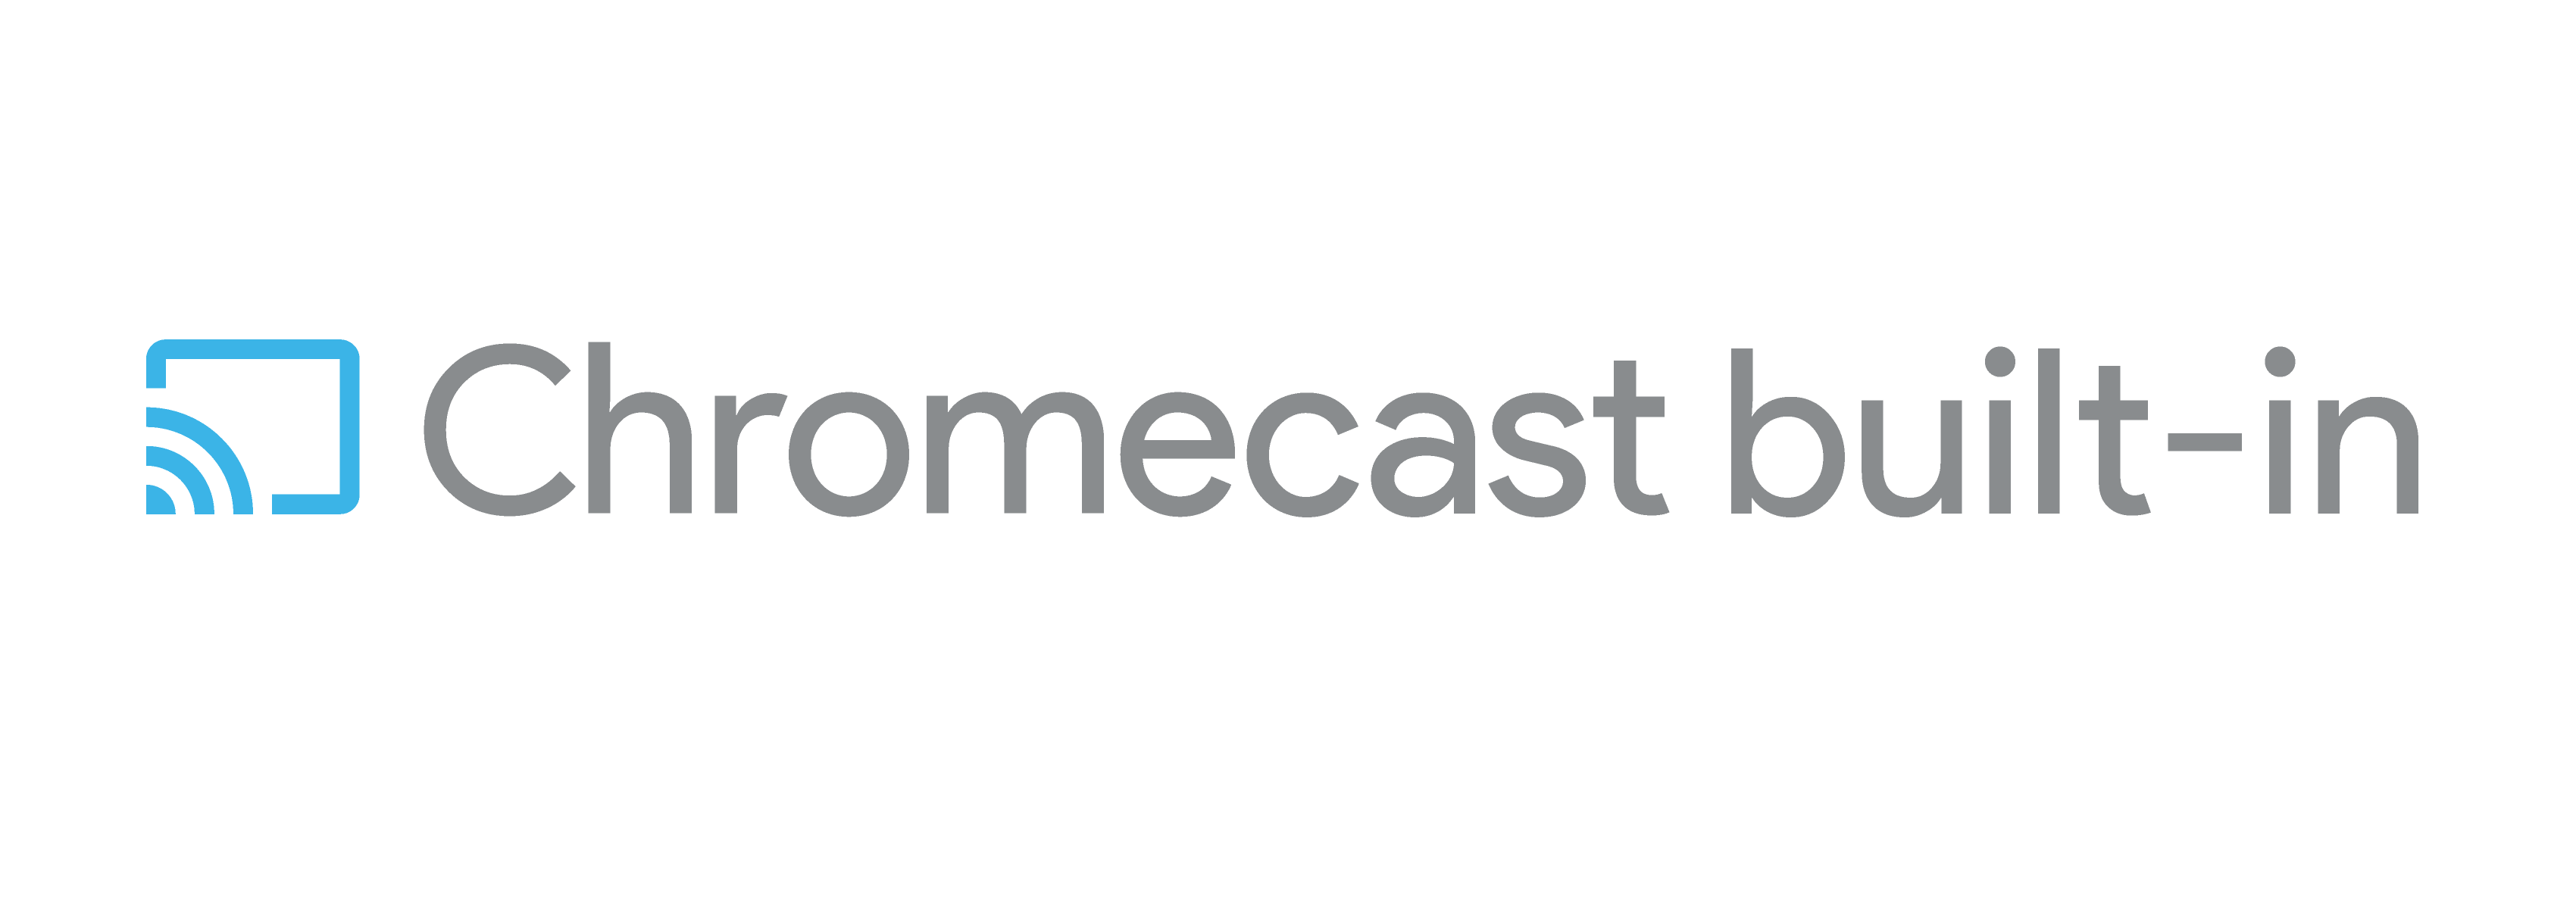 Google Cast is now built in to Chrome